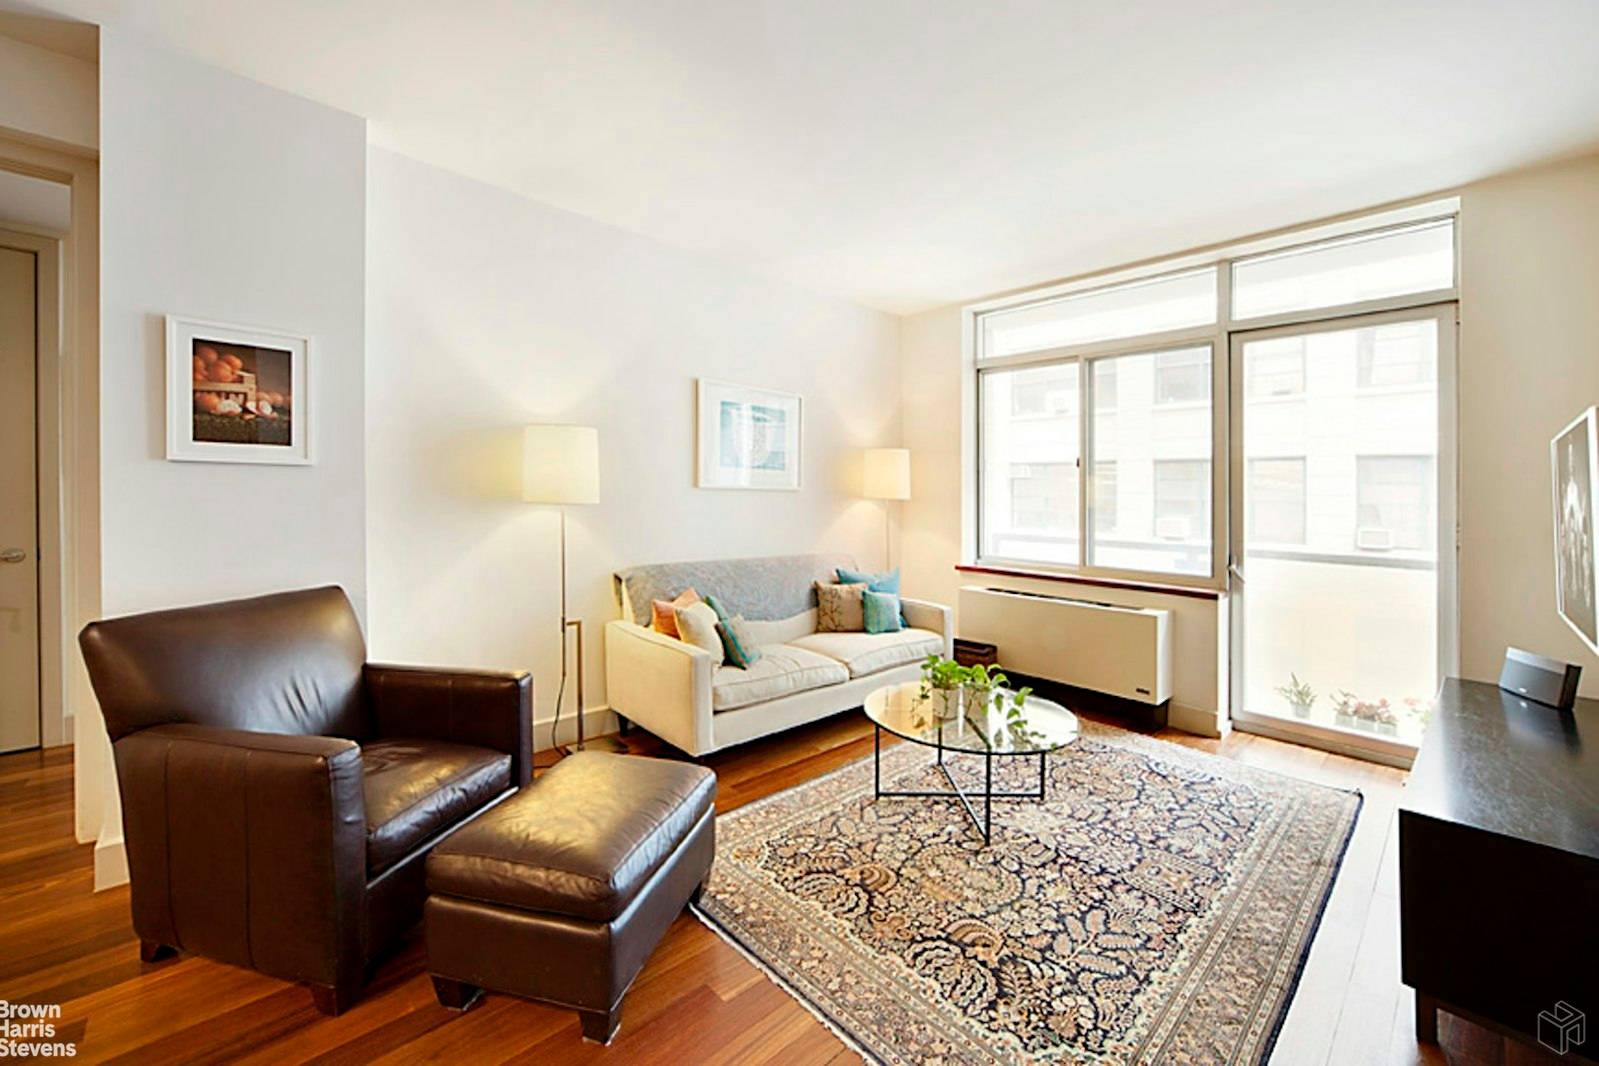 Rarely available, smartly laid out true 2 bedroom, 2 bath in one of Dumbo's finest boutique buildings, This apartment has an open kitchen equipped with Bosch and Jenn Aire appliances.